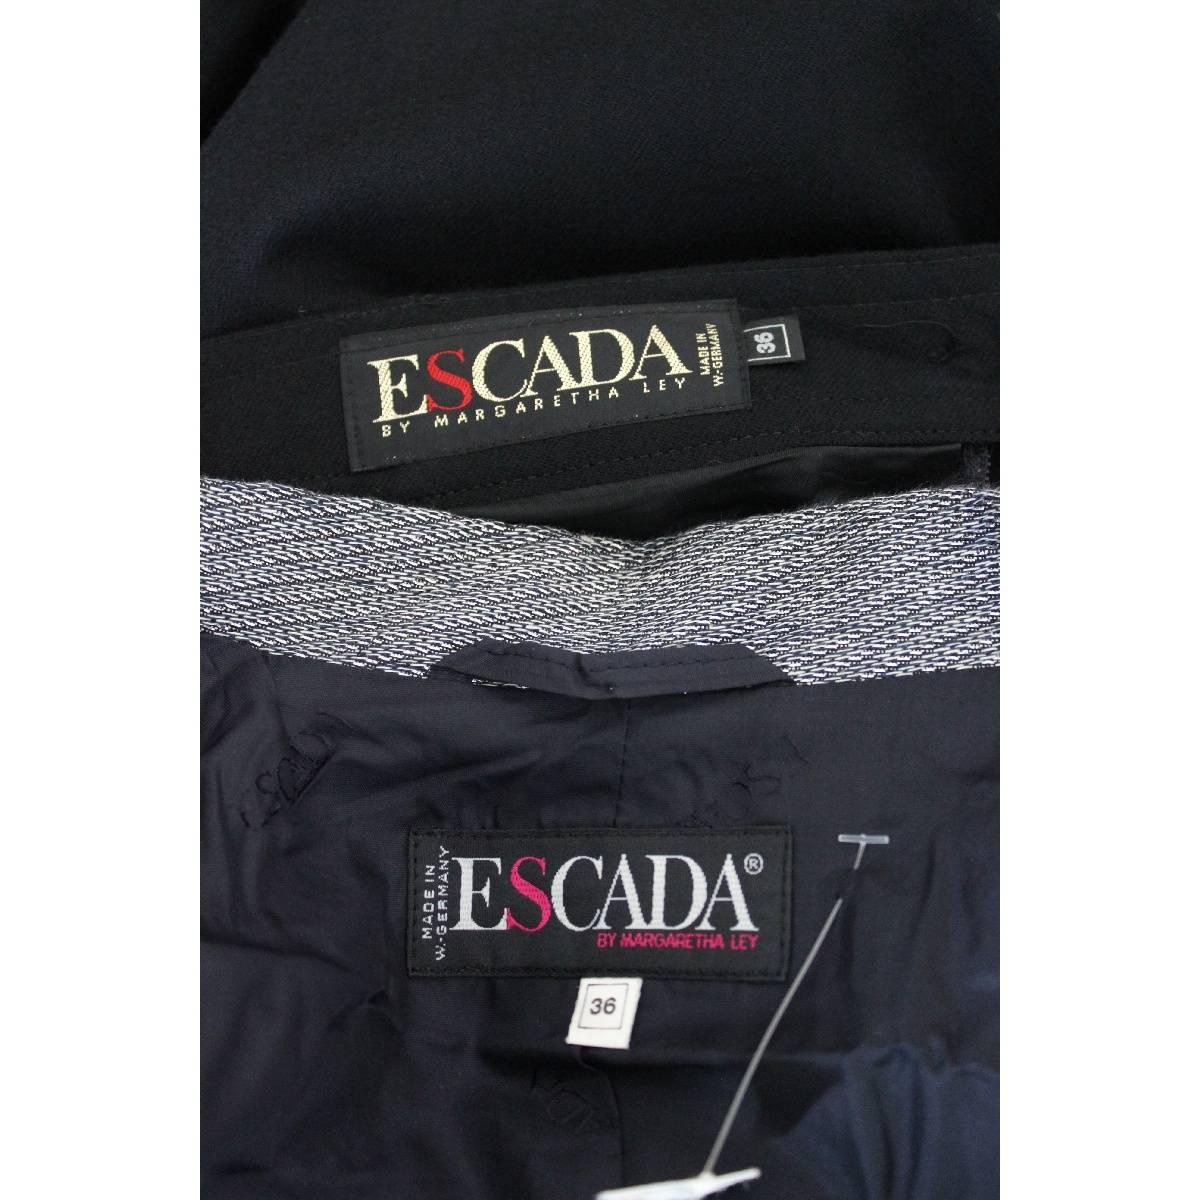 NWT Escada vintage skirt suit laminated jacket women’s 1980s wool size 36 black  For Sale 1